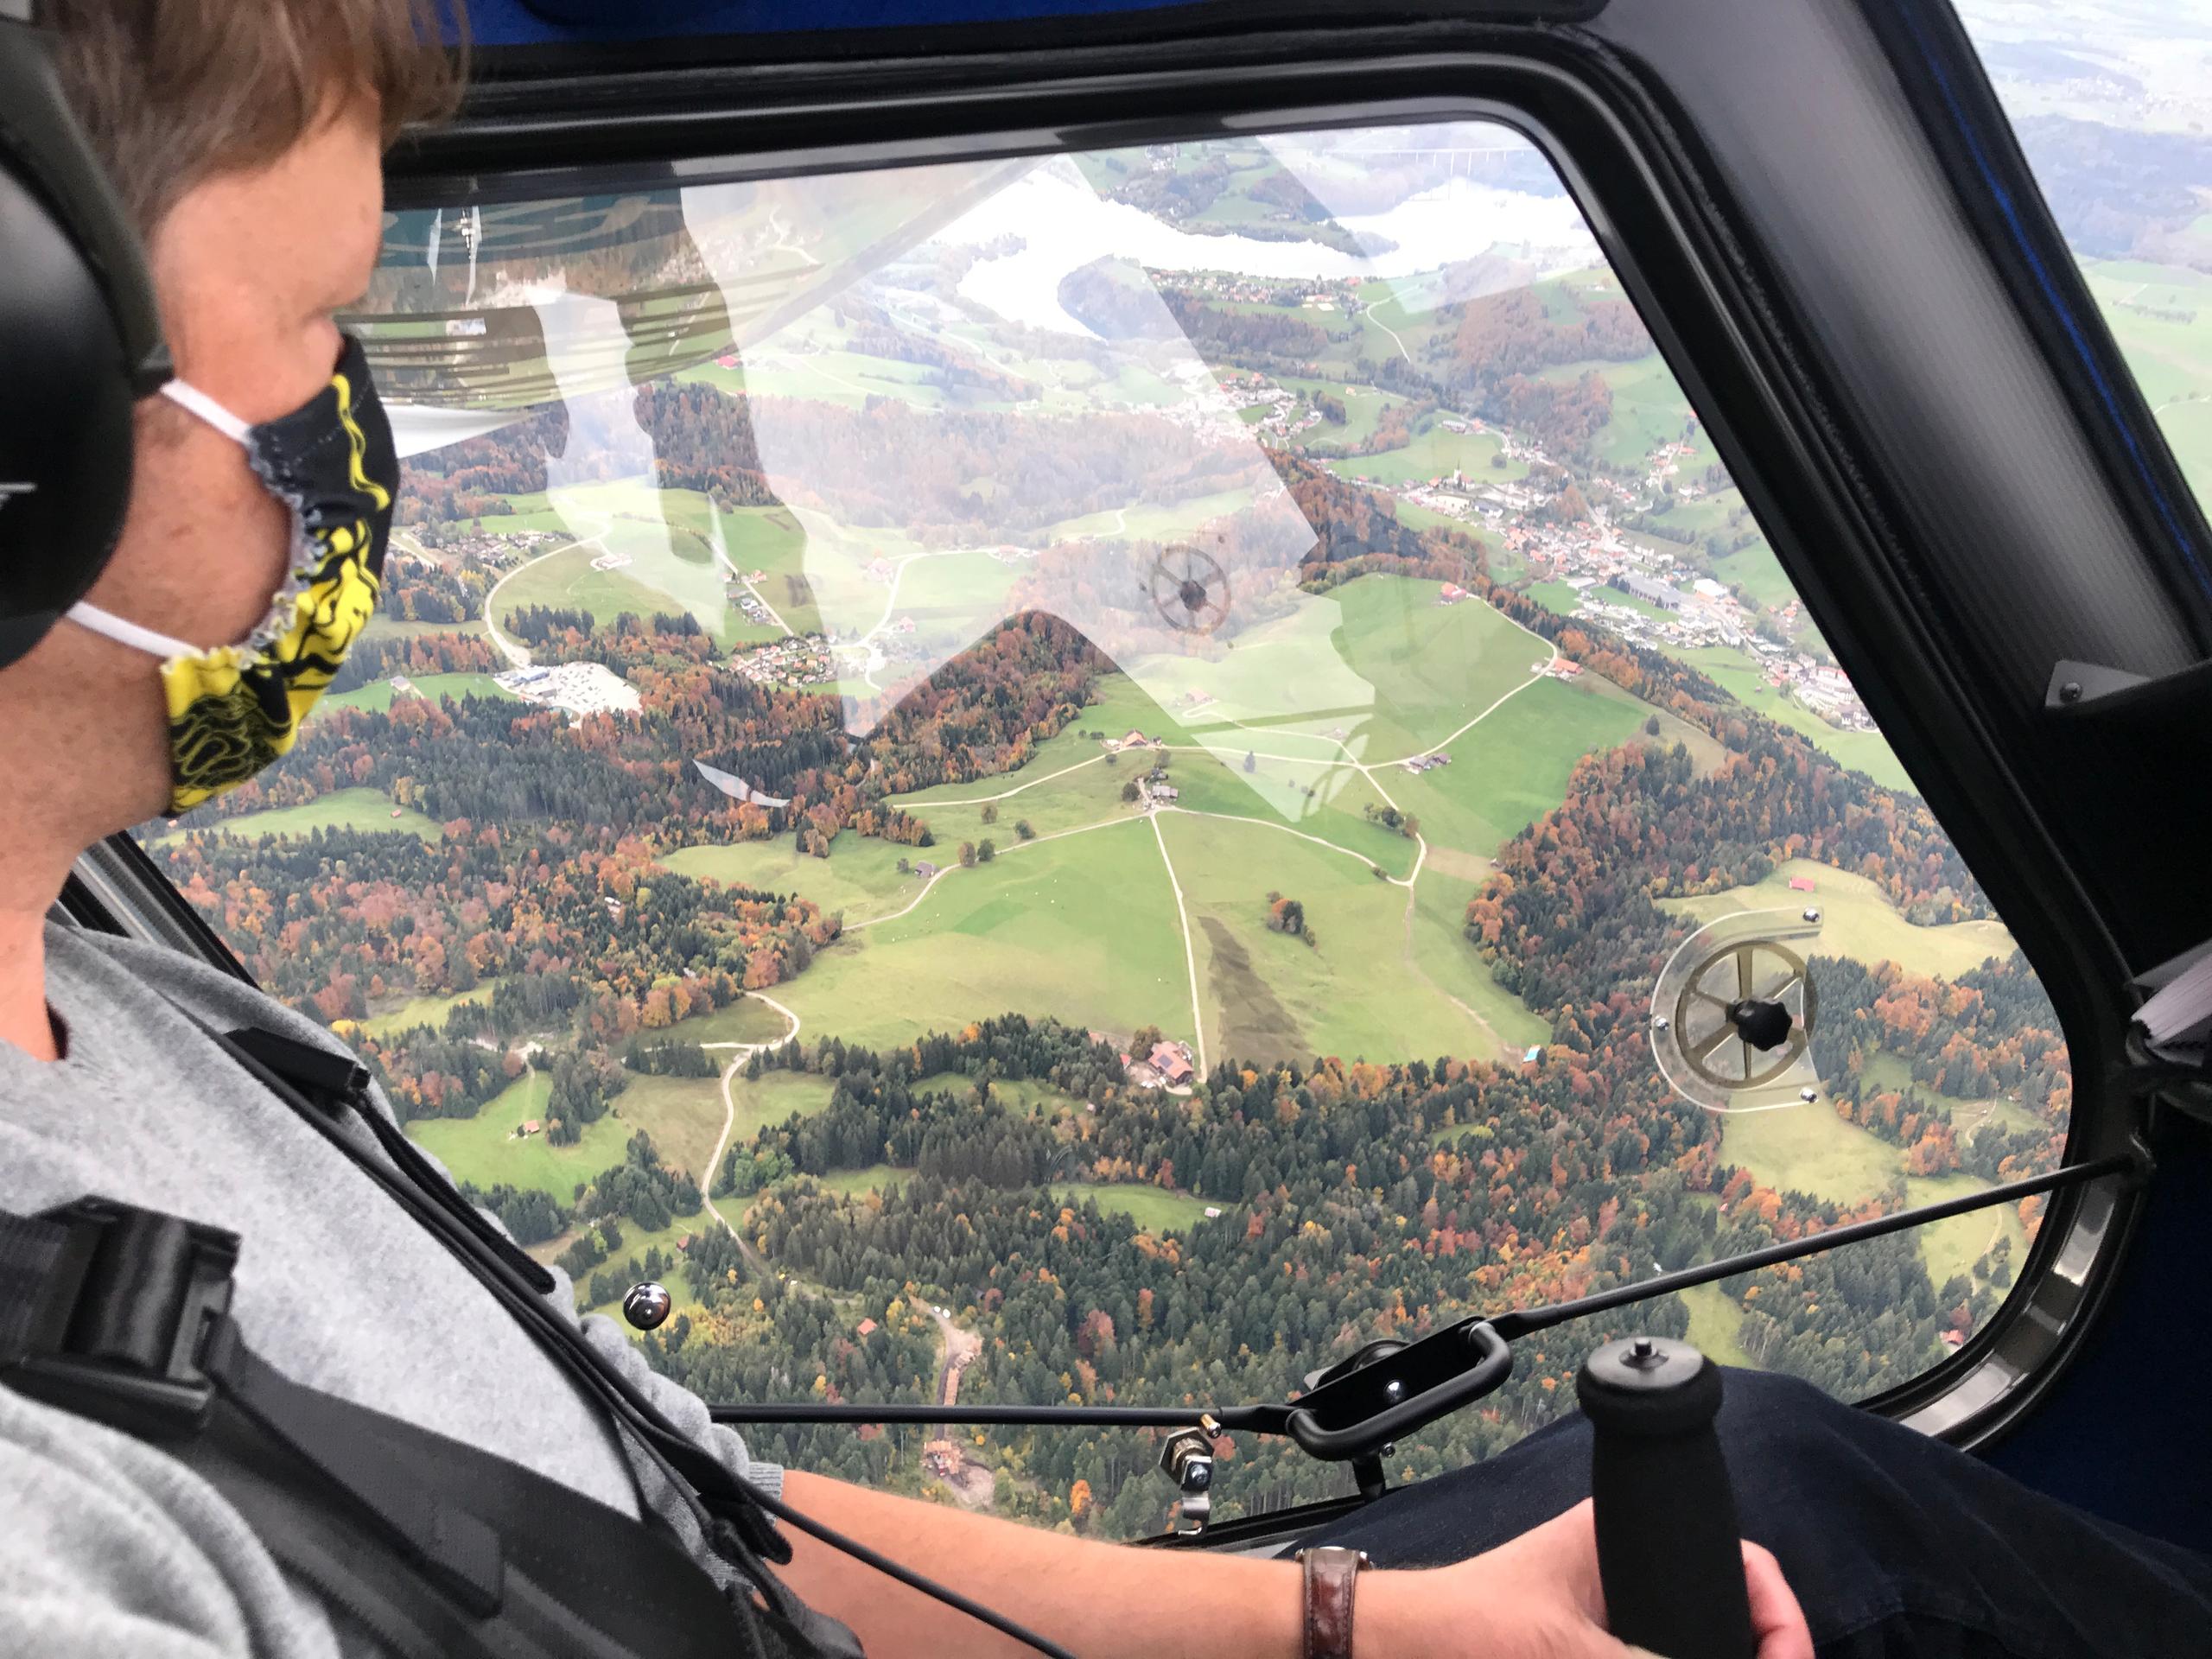 Marc Corpataux above the Fribourg countryside in his Pipistrel Velis Electro plane.